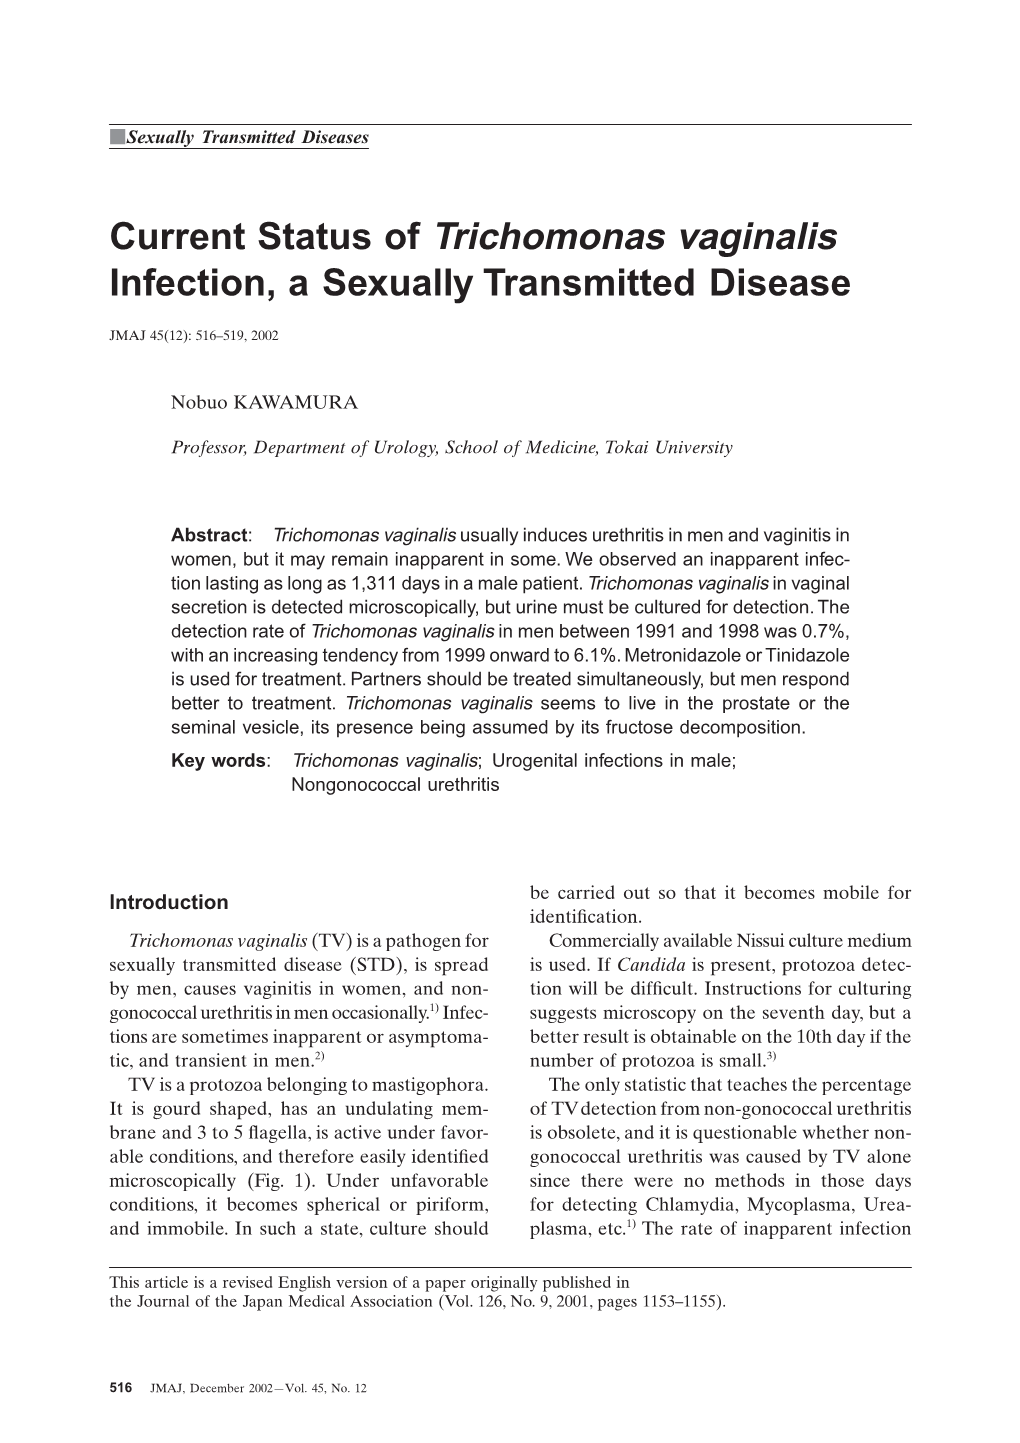 Current Status of Trichomonas Vaginalis Infection, a Sexually Transmitted Disease